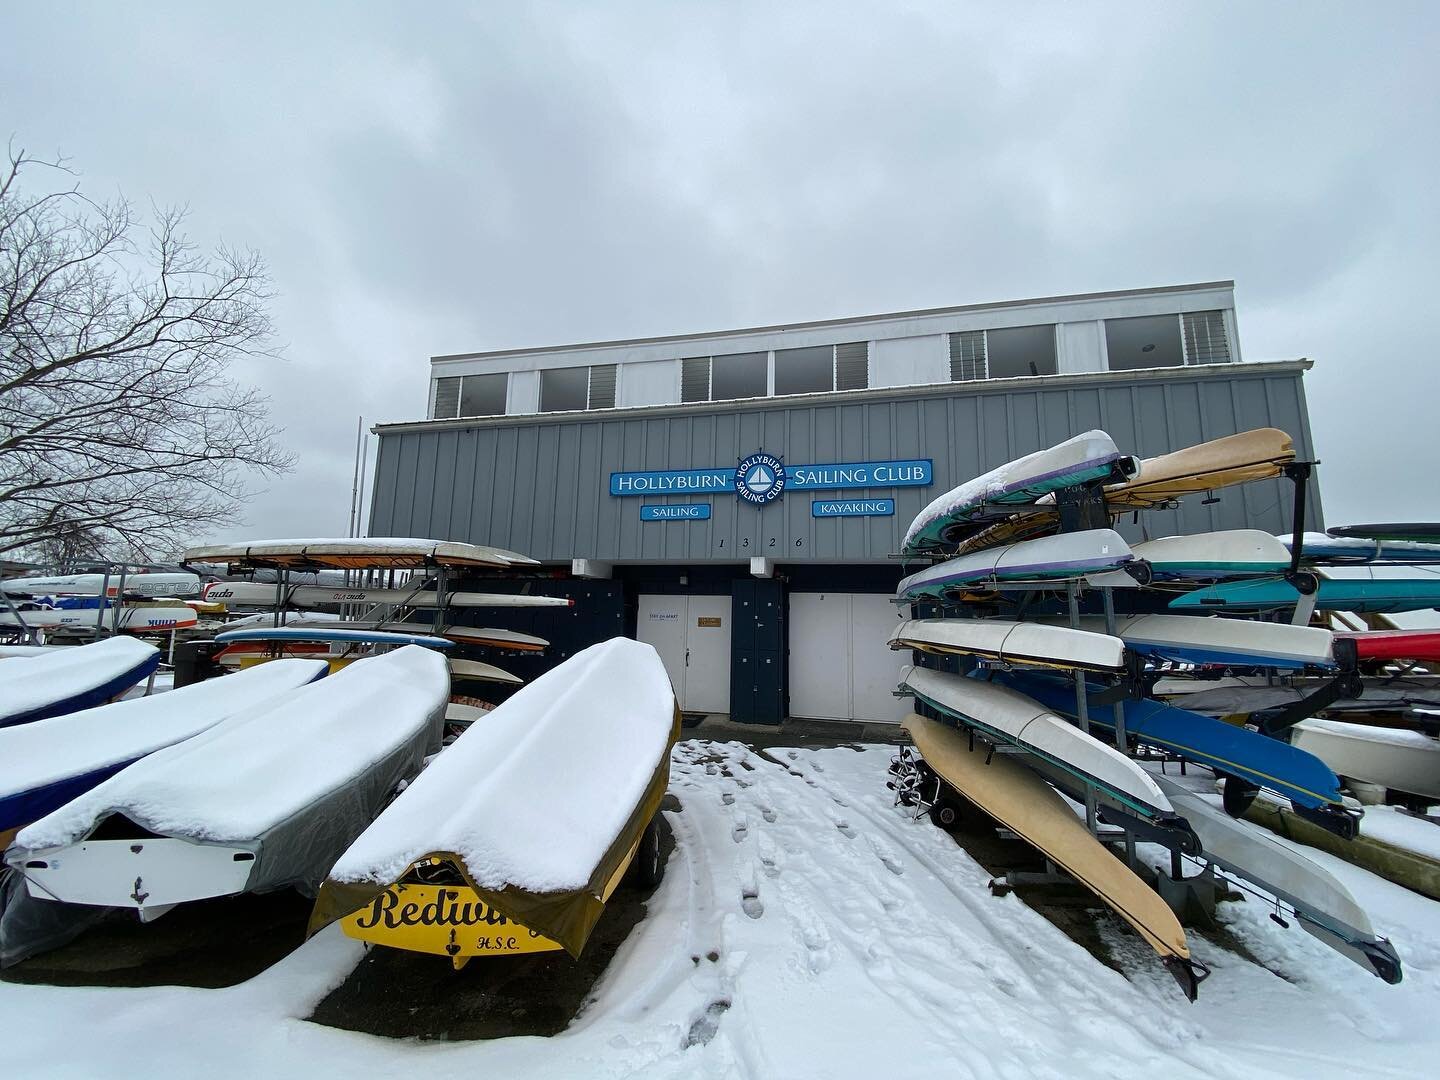 This weekend has been a bit quieter than usual... hope everyone is enjoying the snow! 

#hollyburnsailingclub #westvancouver #ambleside